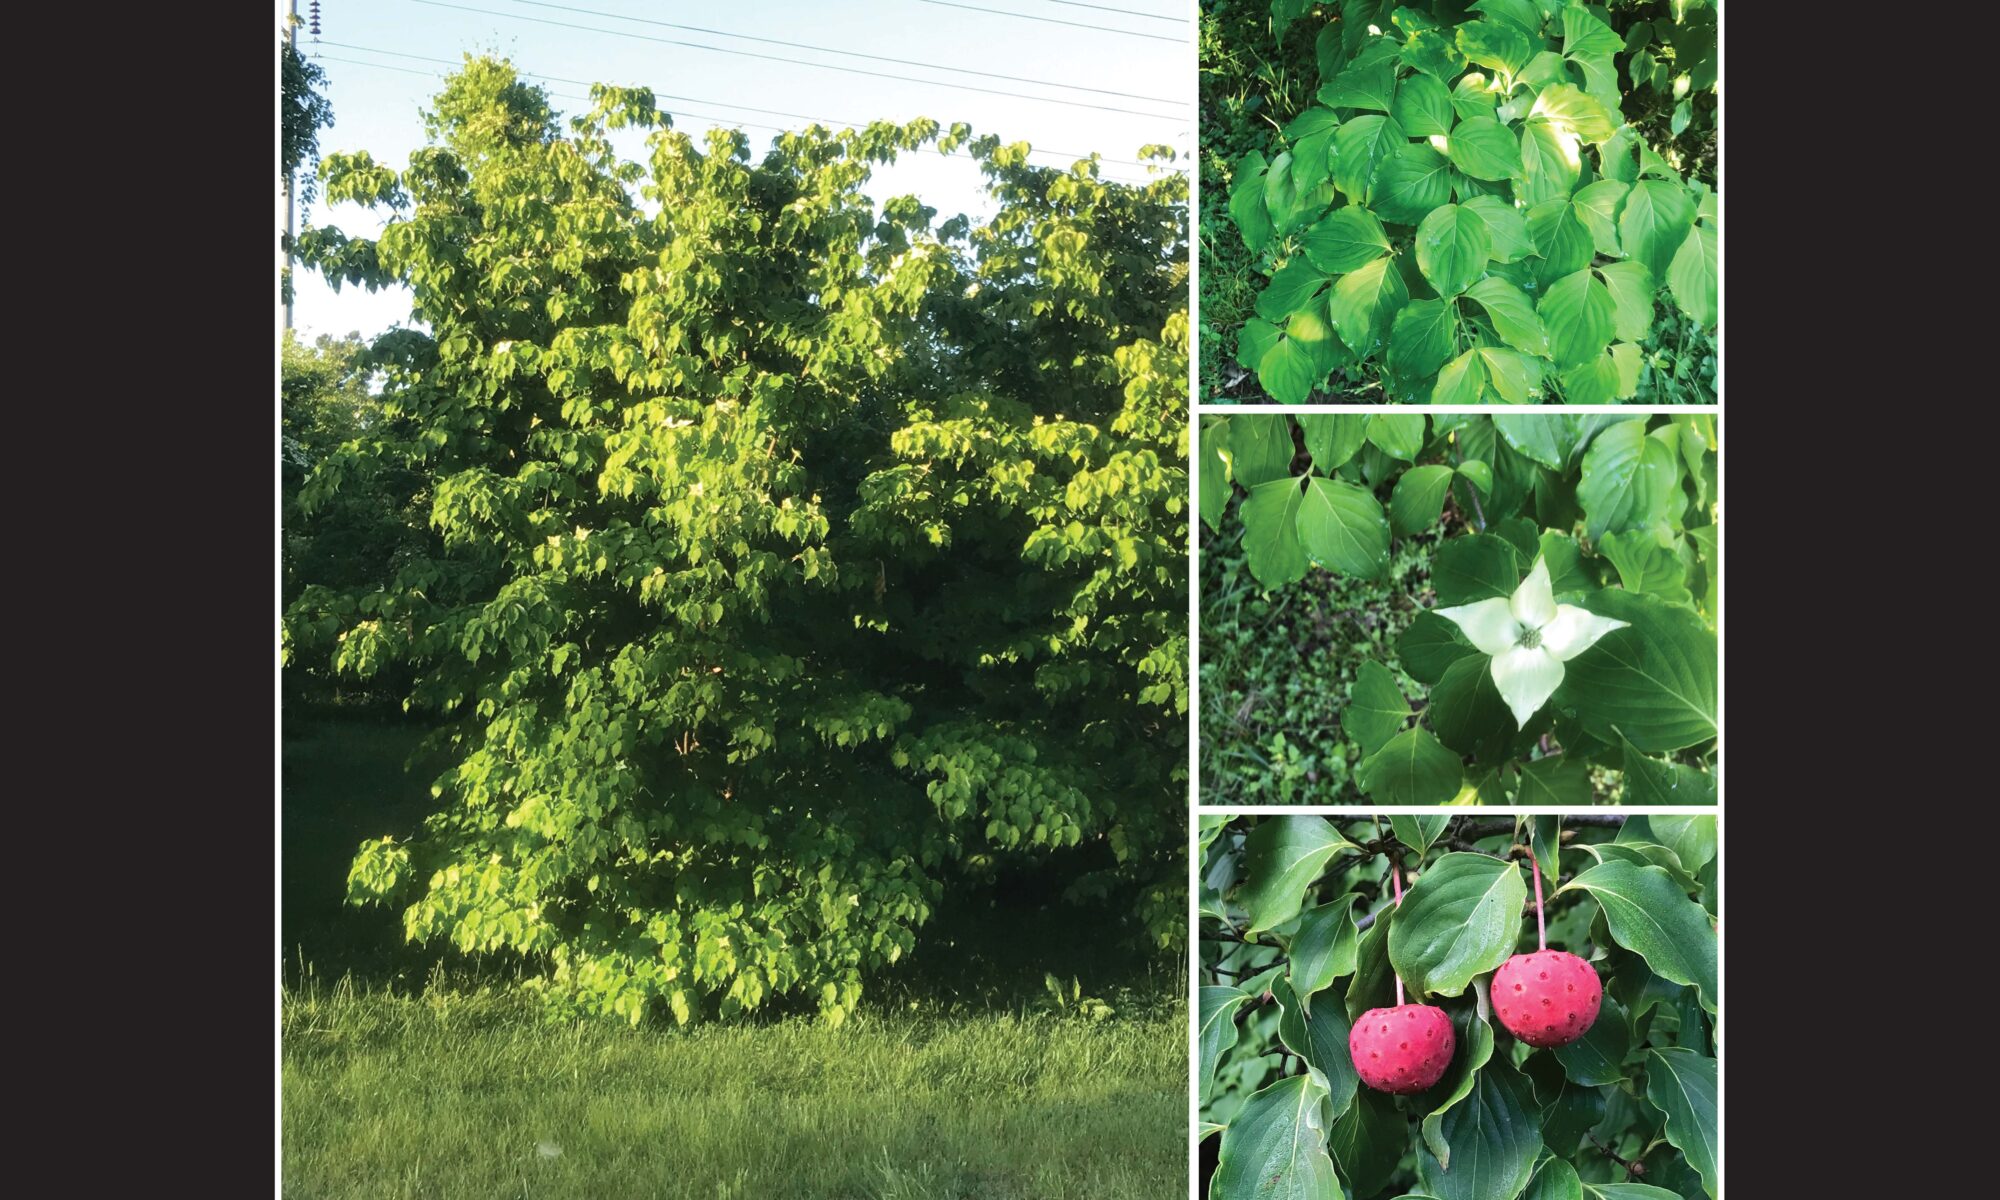 HortScience Cover. 'Sarah's Mountain Pixie'. (A) Bushy tree form of 'Sarah's Mountain Pixie'. (B) Large leaves. (C) Spade-shaped bracts. (D). Large fruits in the fall.